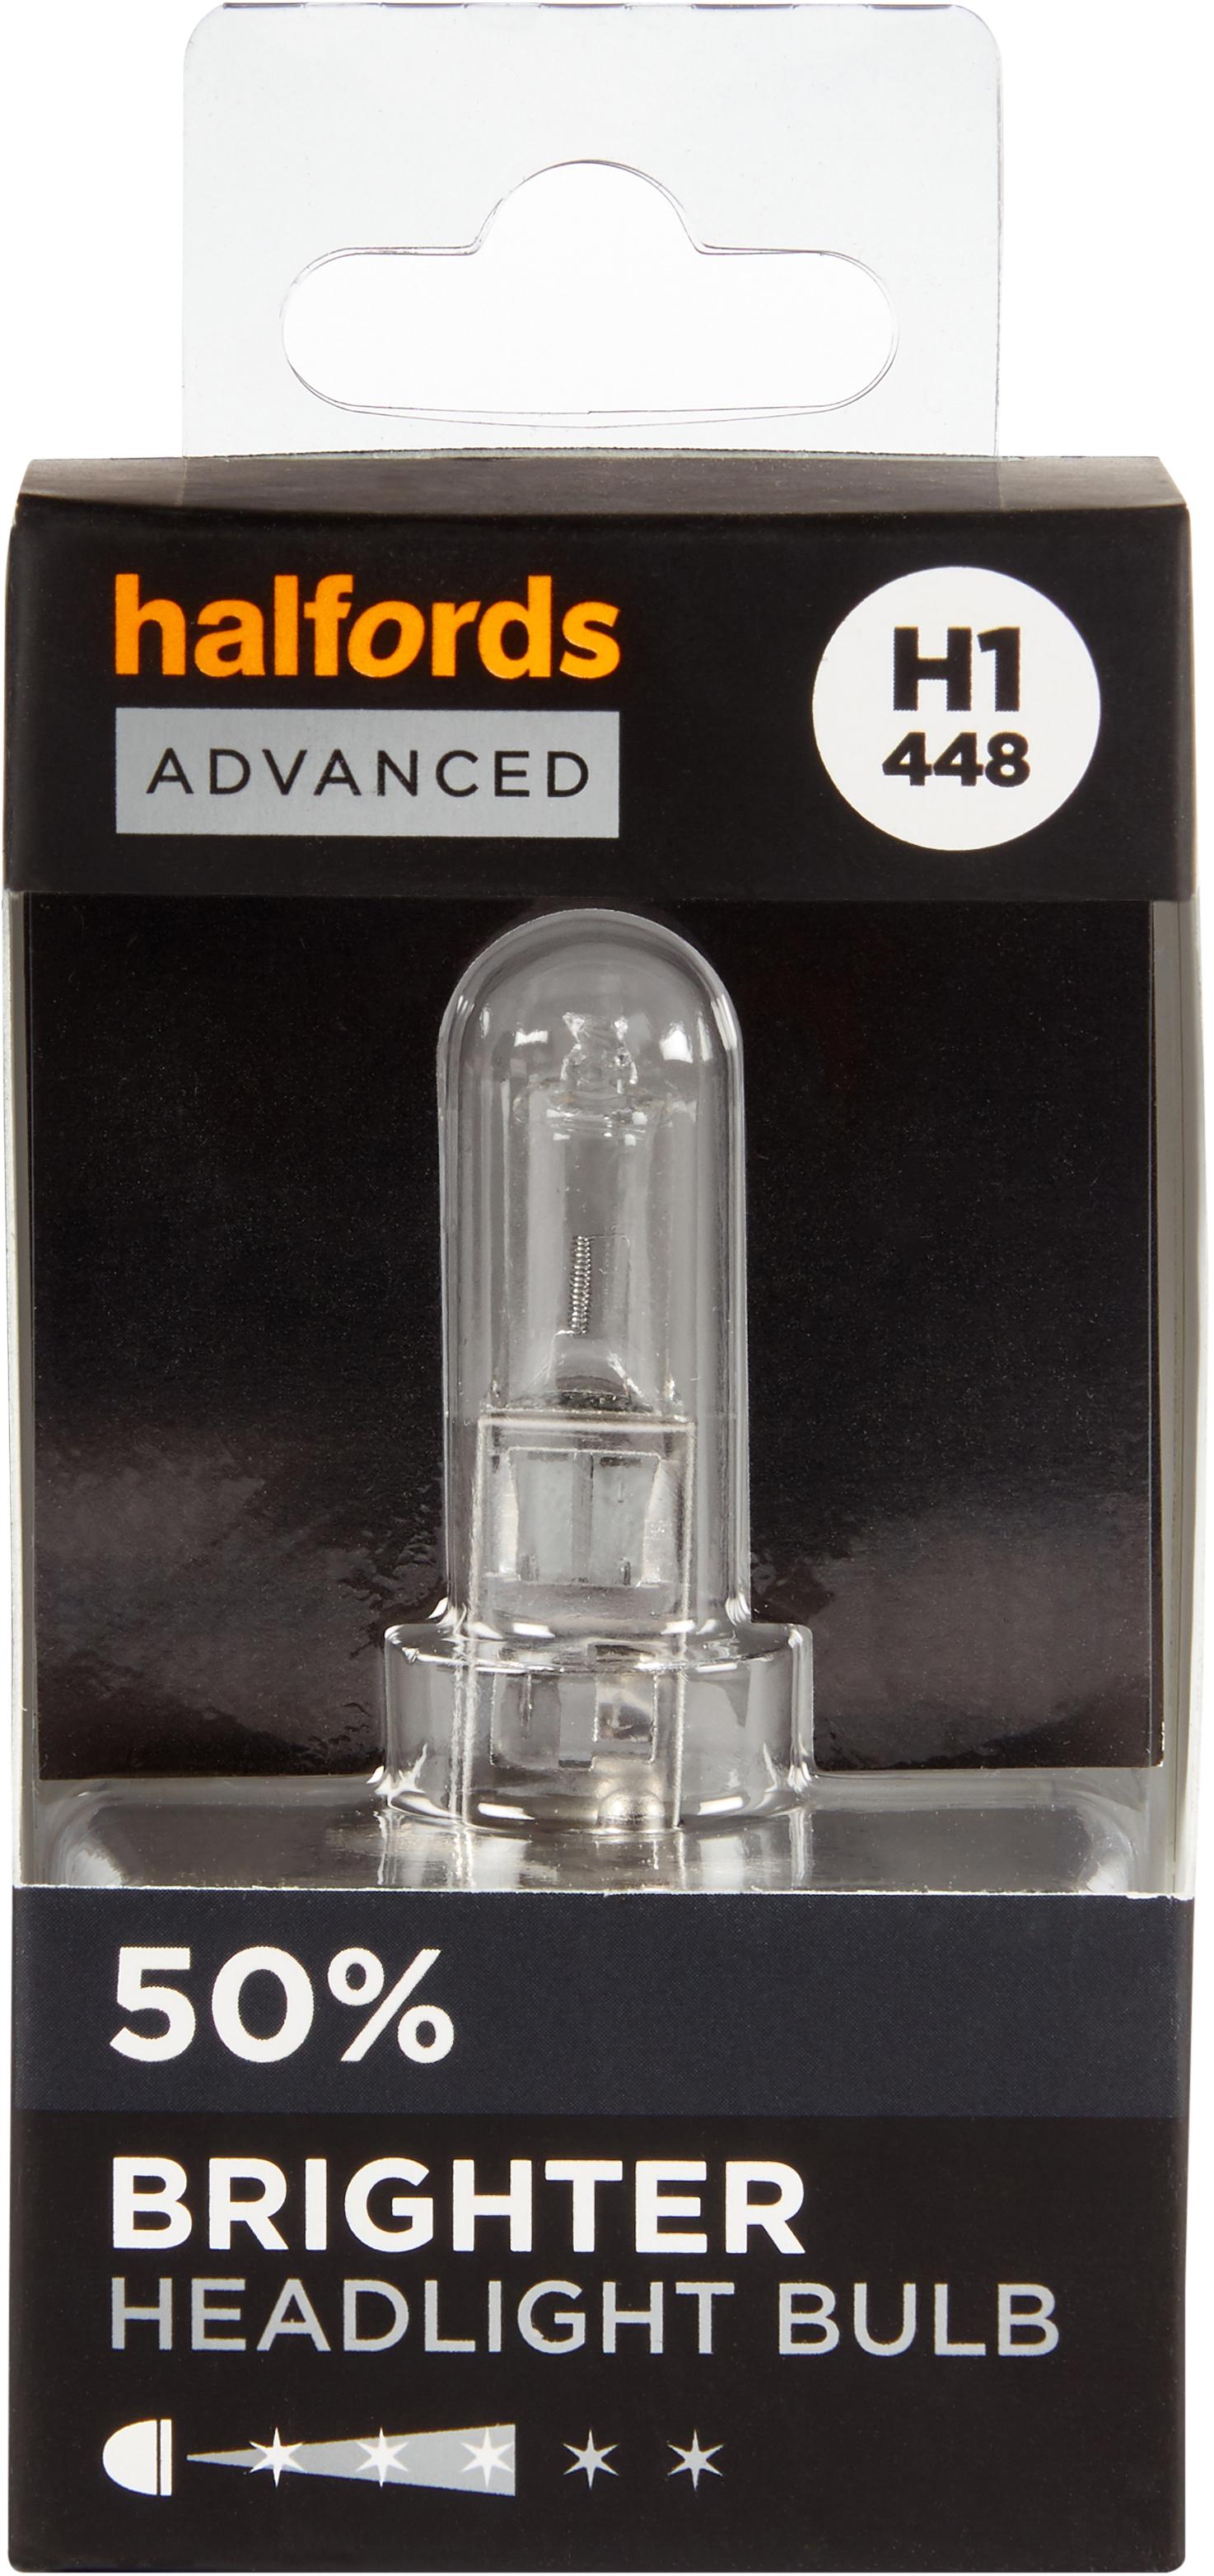 H1 448 Car Headlight Bulb Halfords Advanced Up To +50 Percent Brighter Single Pack